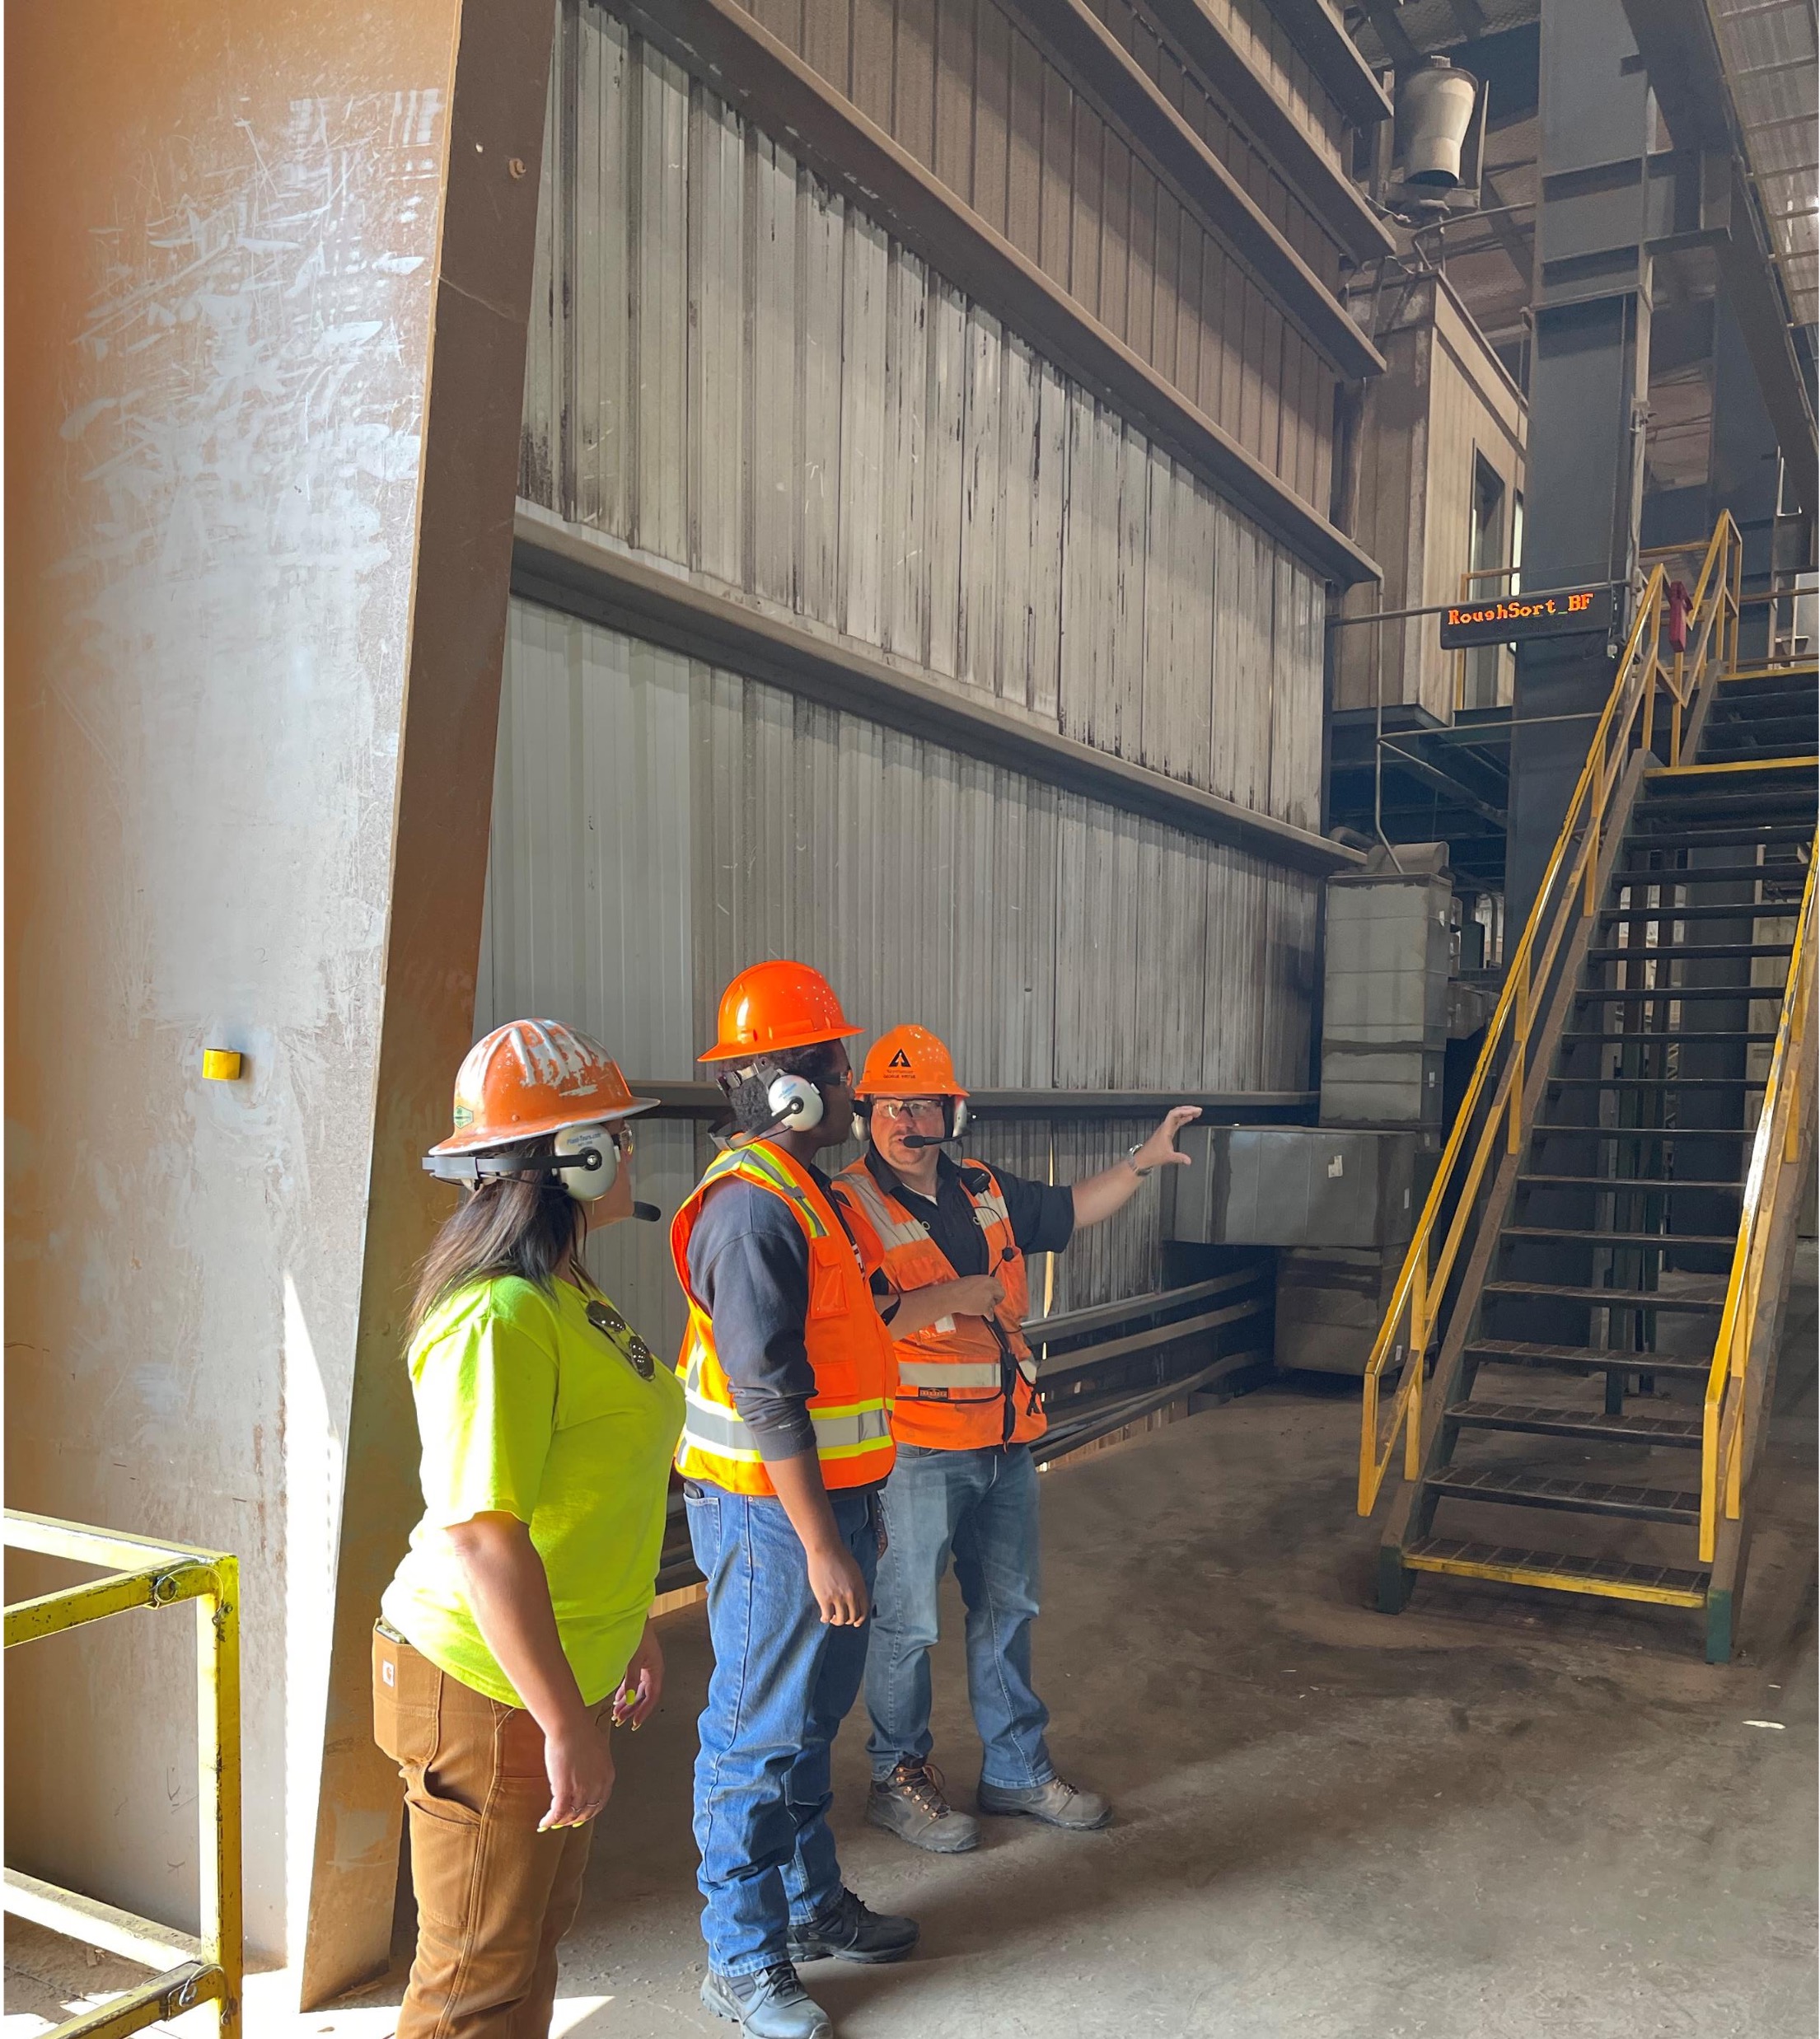 Image of Leesha and Danny getting a tour of the Santiam mill from George Virtue, Santiam operations manager.